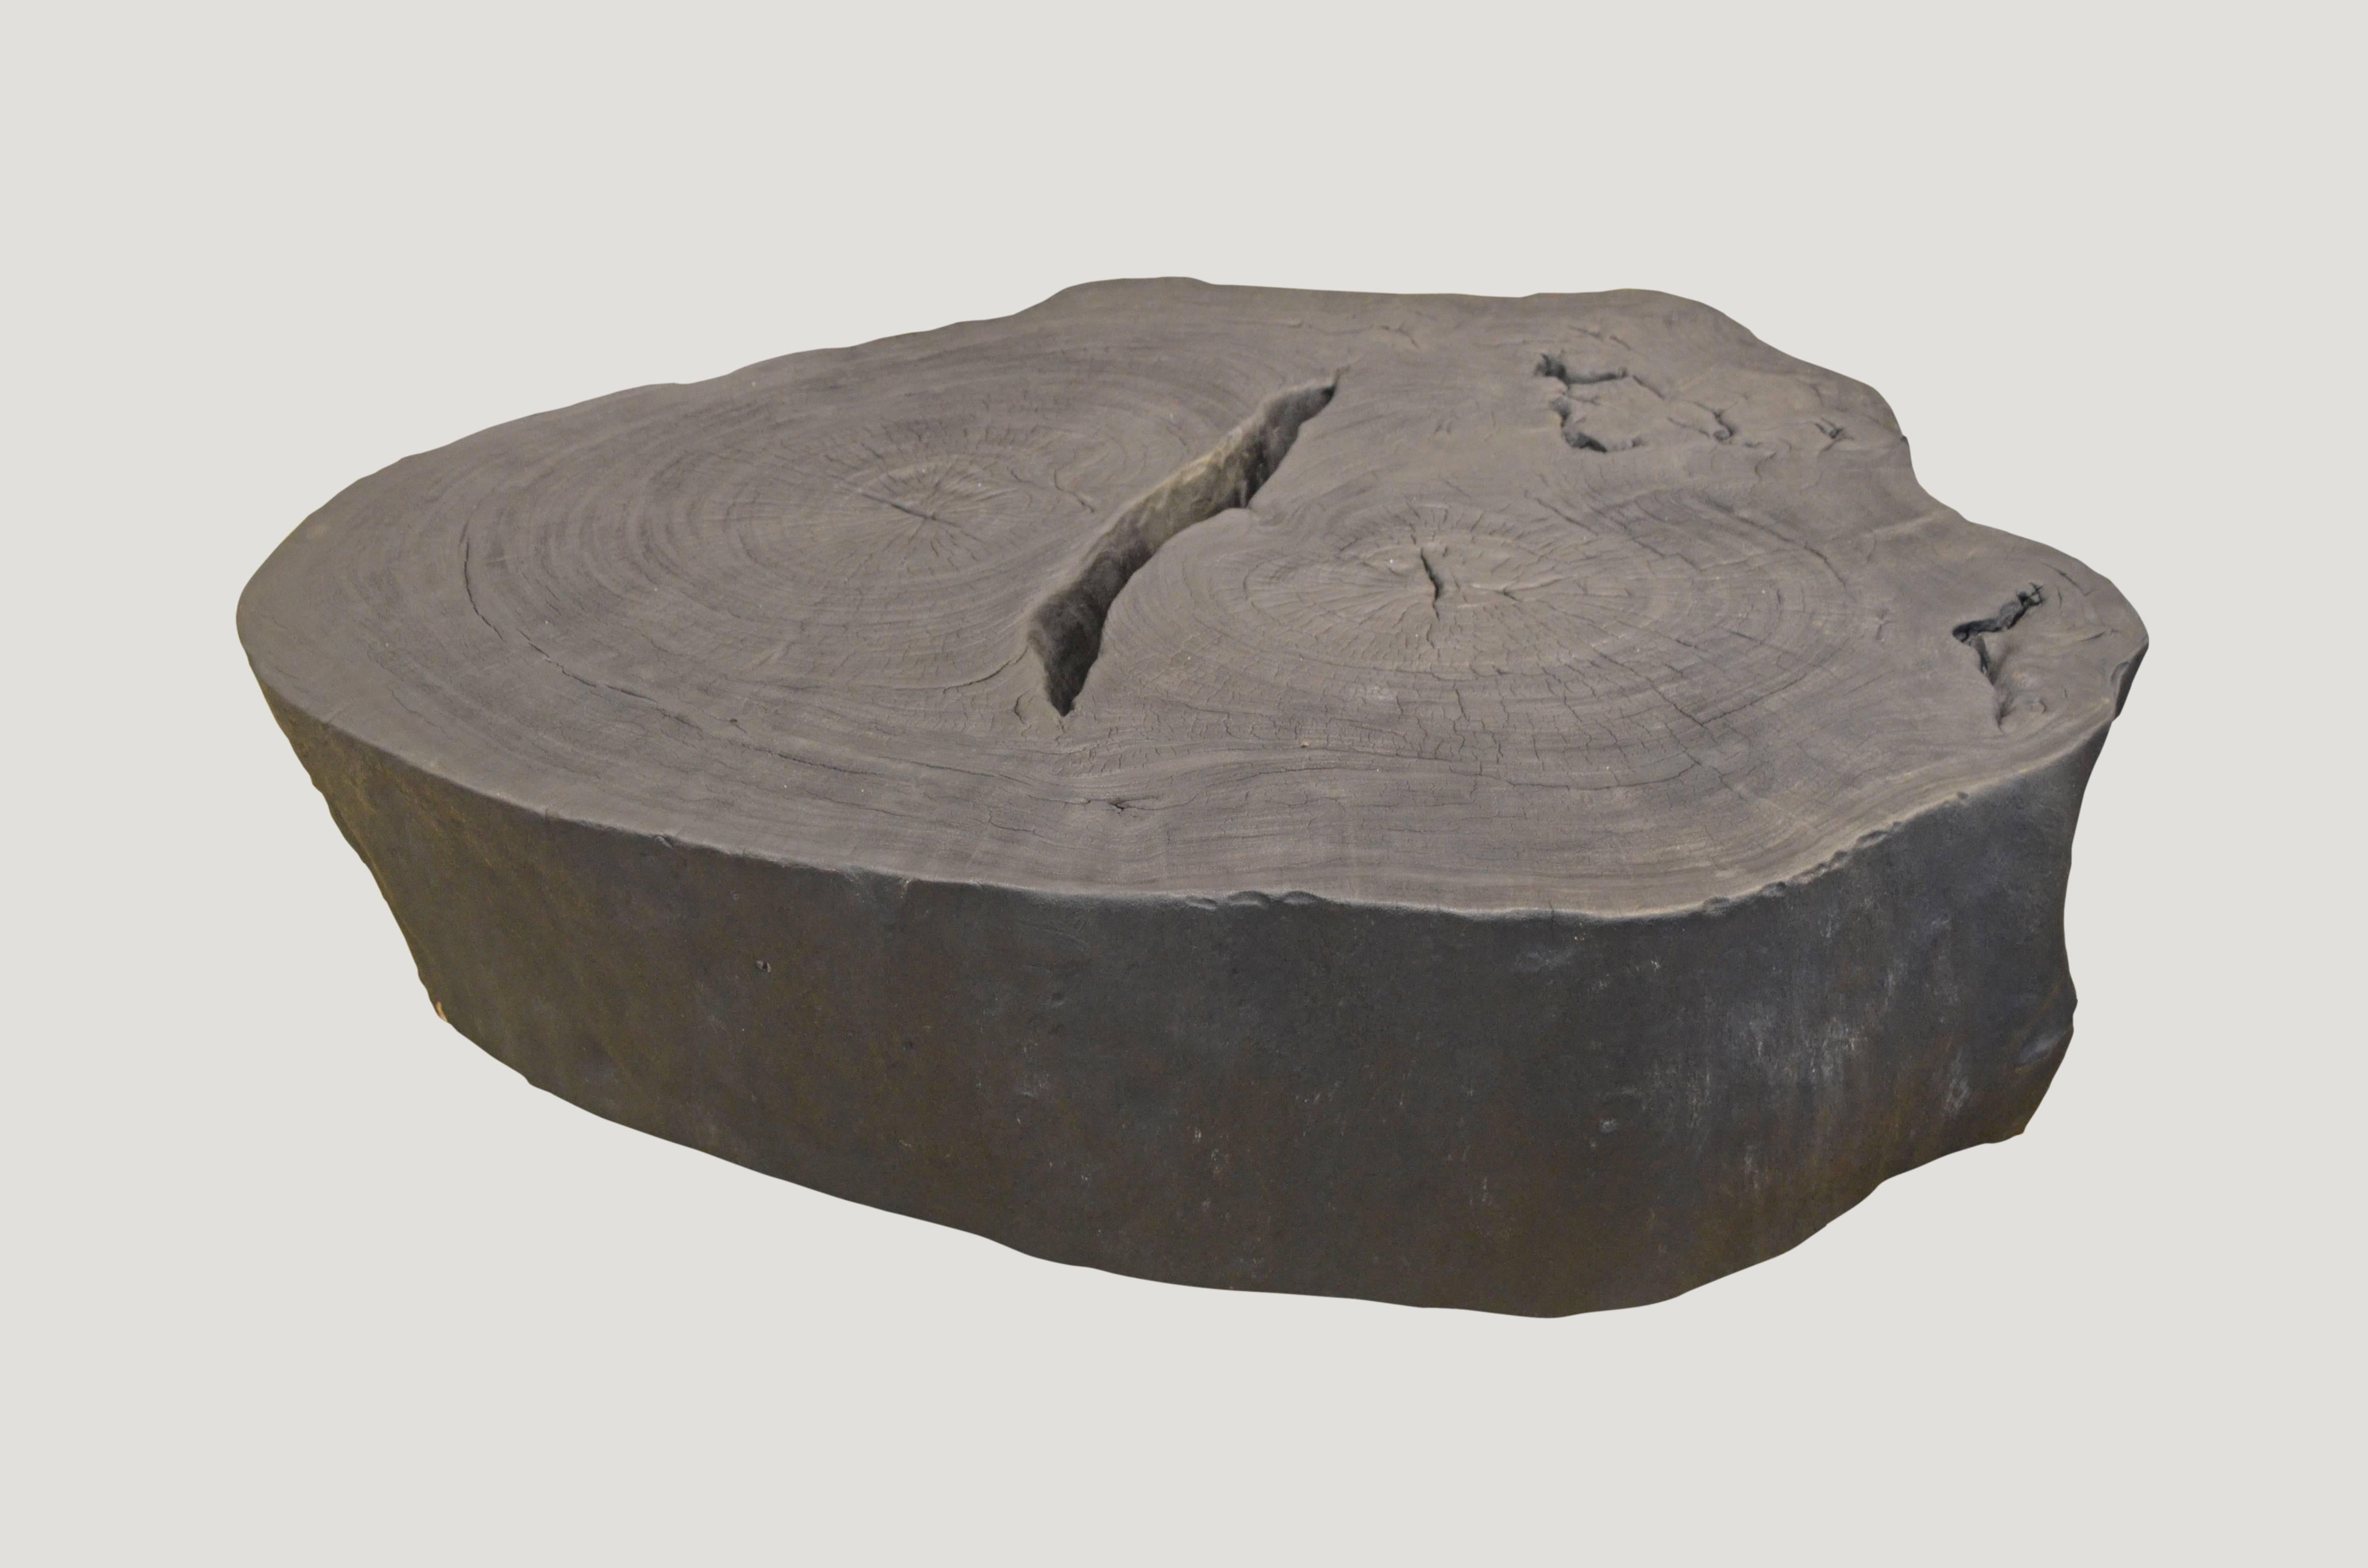 Impressive single reclaimed root coffee table. Burnt, sanded and sealed. Organic is the new modern.

The Triple Burnt collection represents a unique line of modern furniture made from solid organic wood. Burnt three times to produce a rich, charcoal